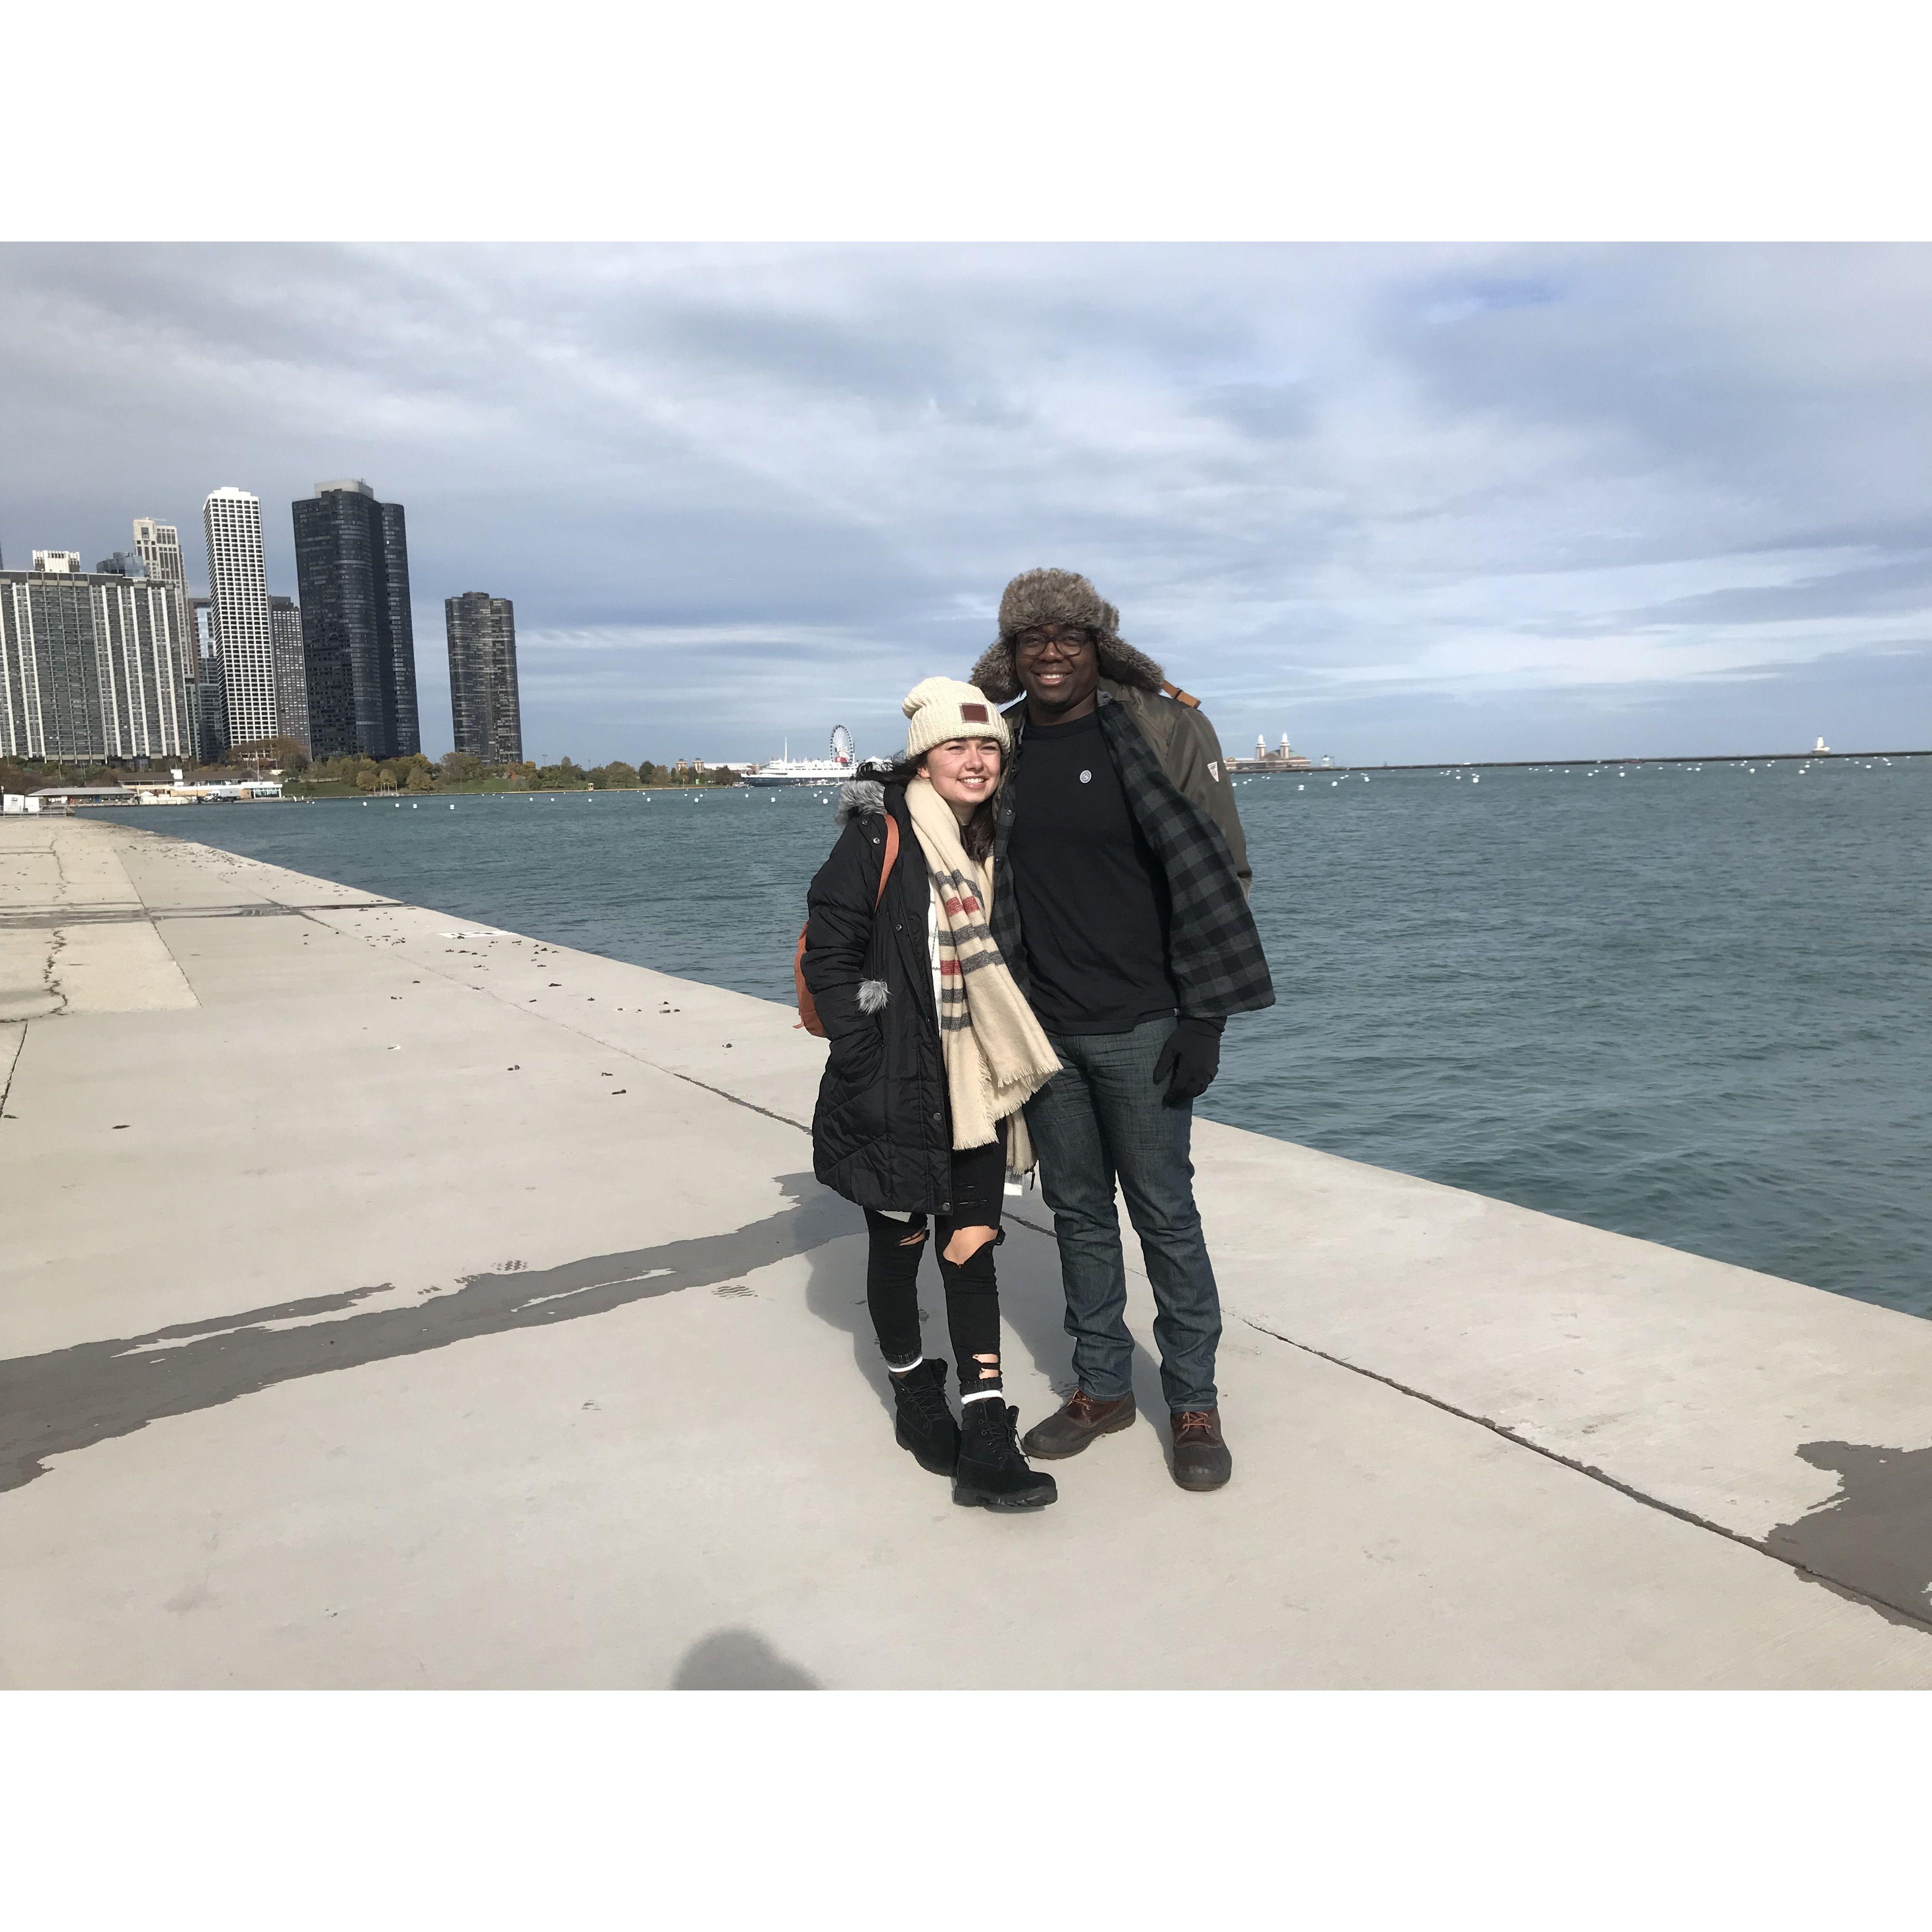 Our first trip together in one of our favorite places- Chicago!